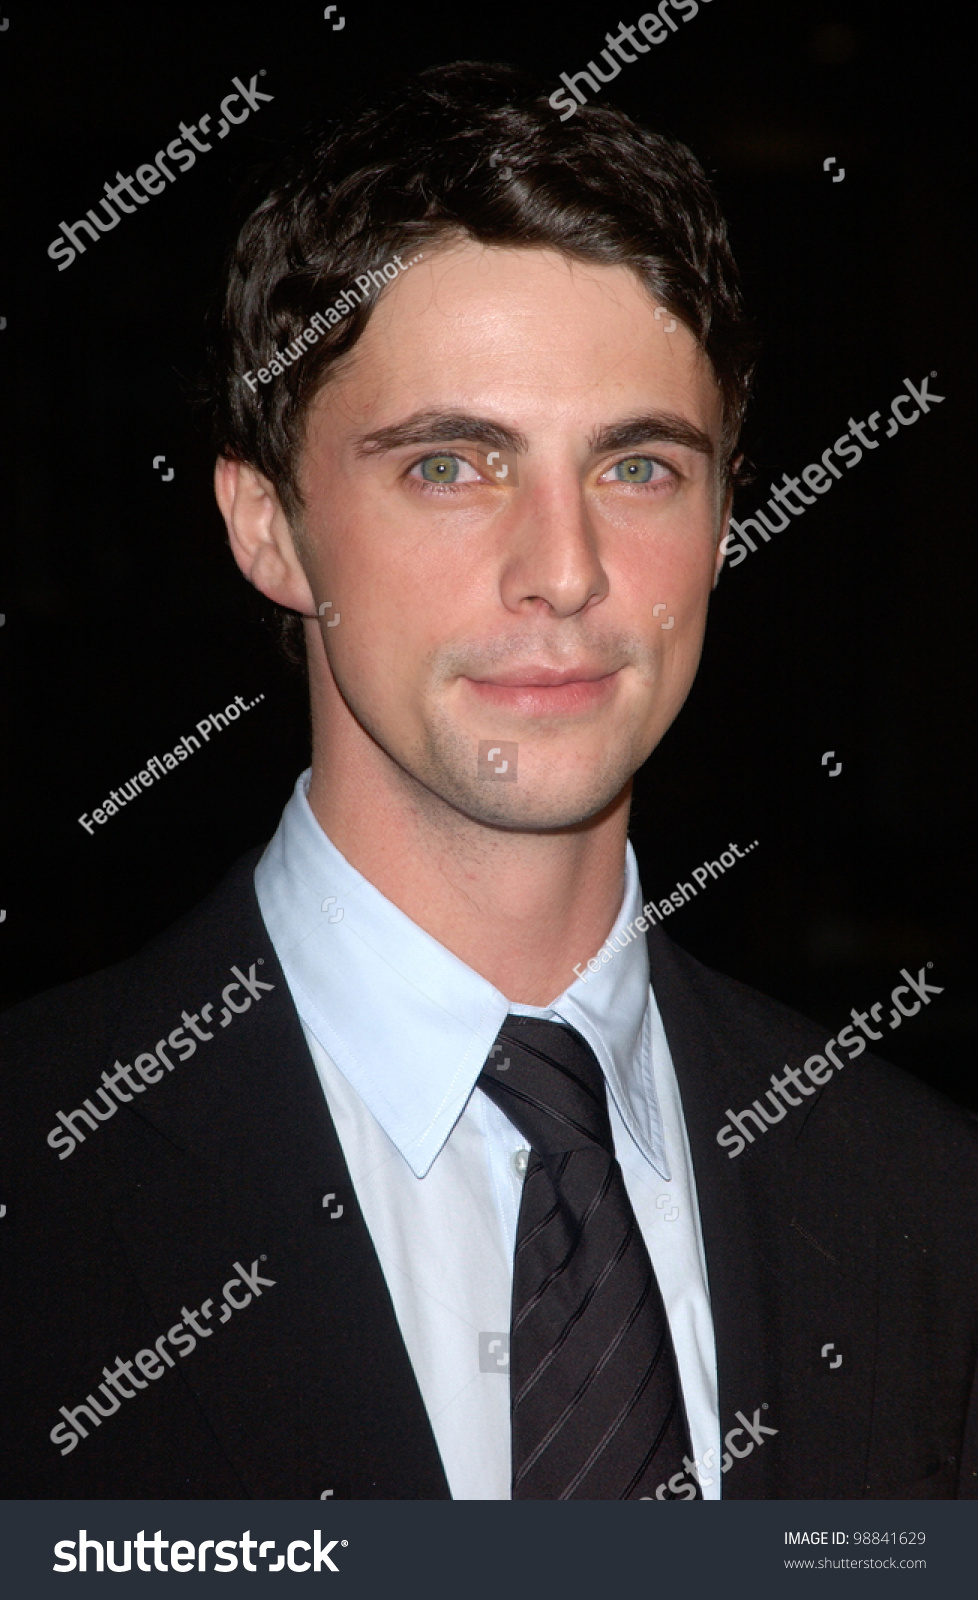 Actor Matthew Goode At The World Premiere, In Hollywood, Of His New ...